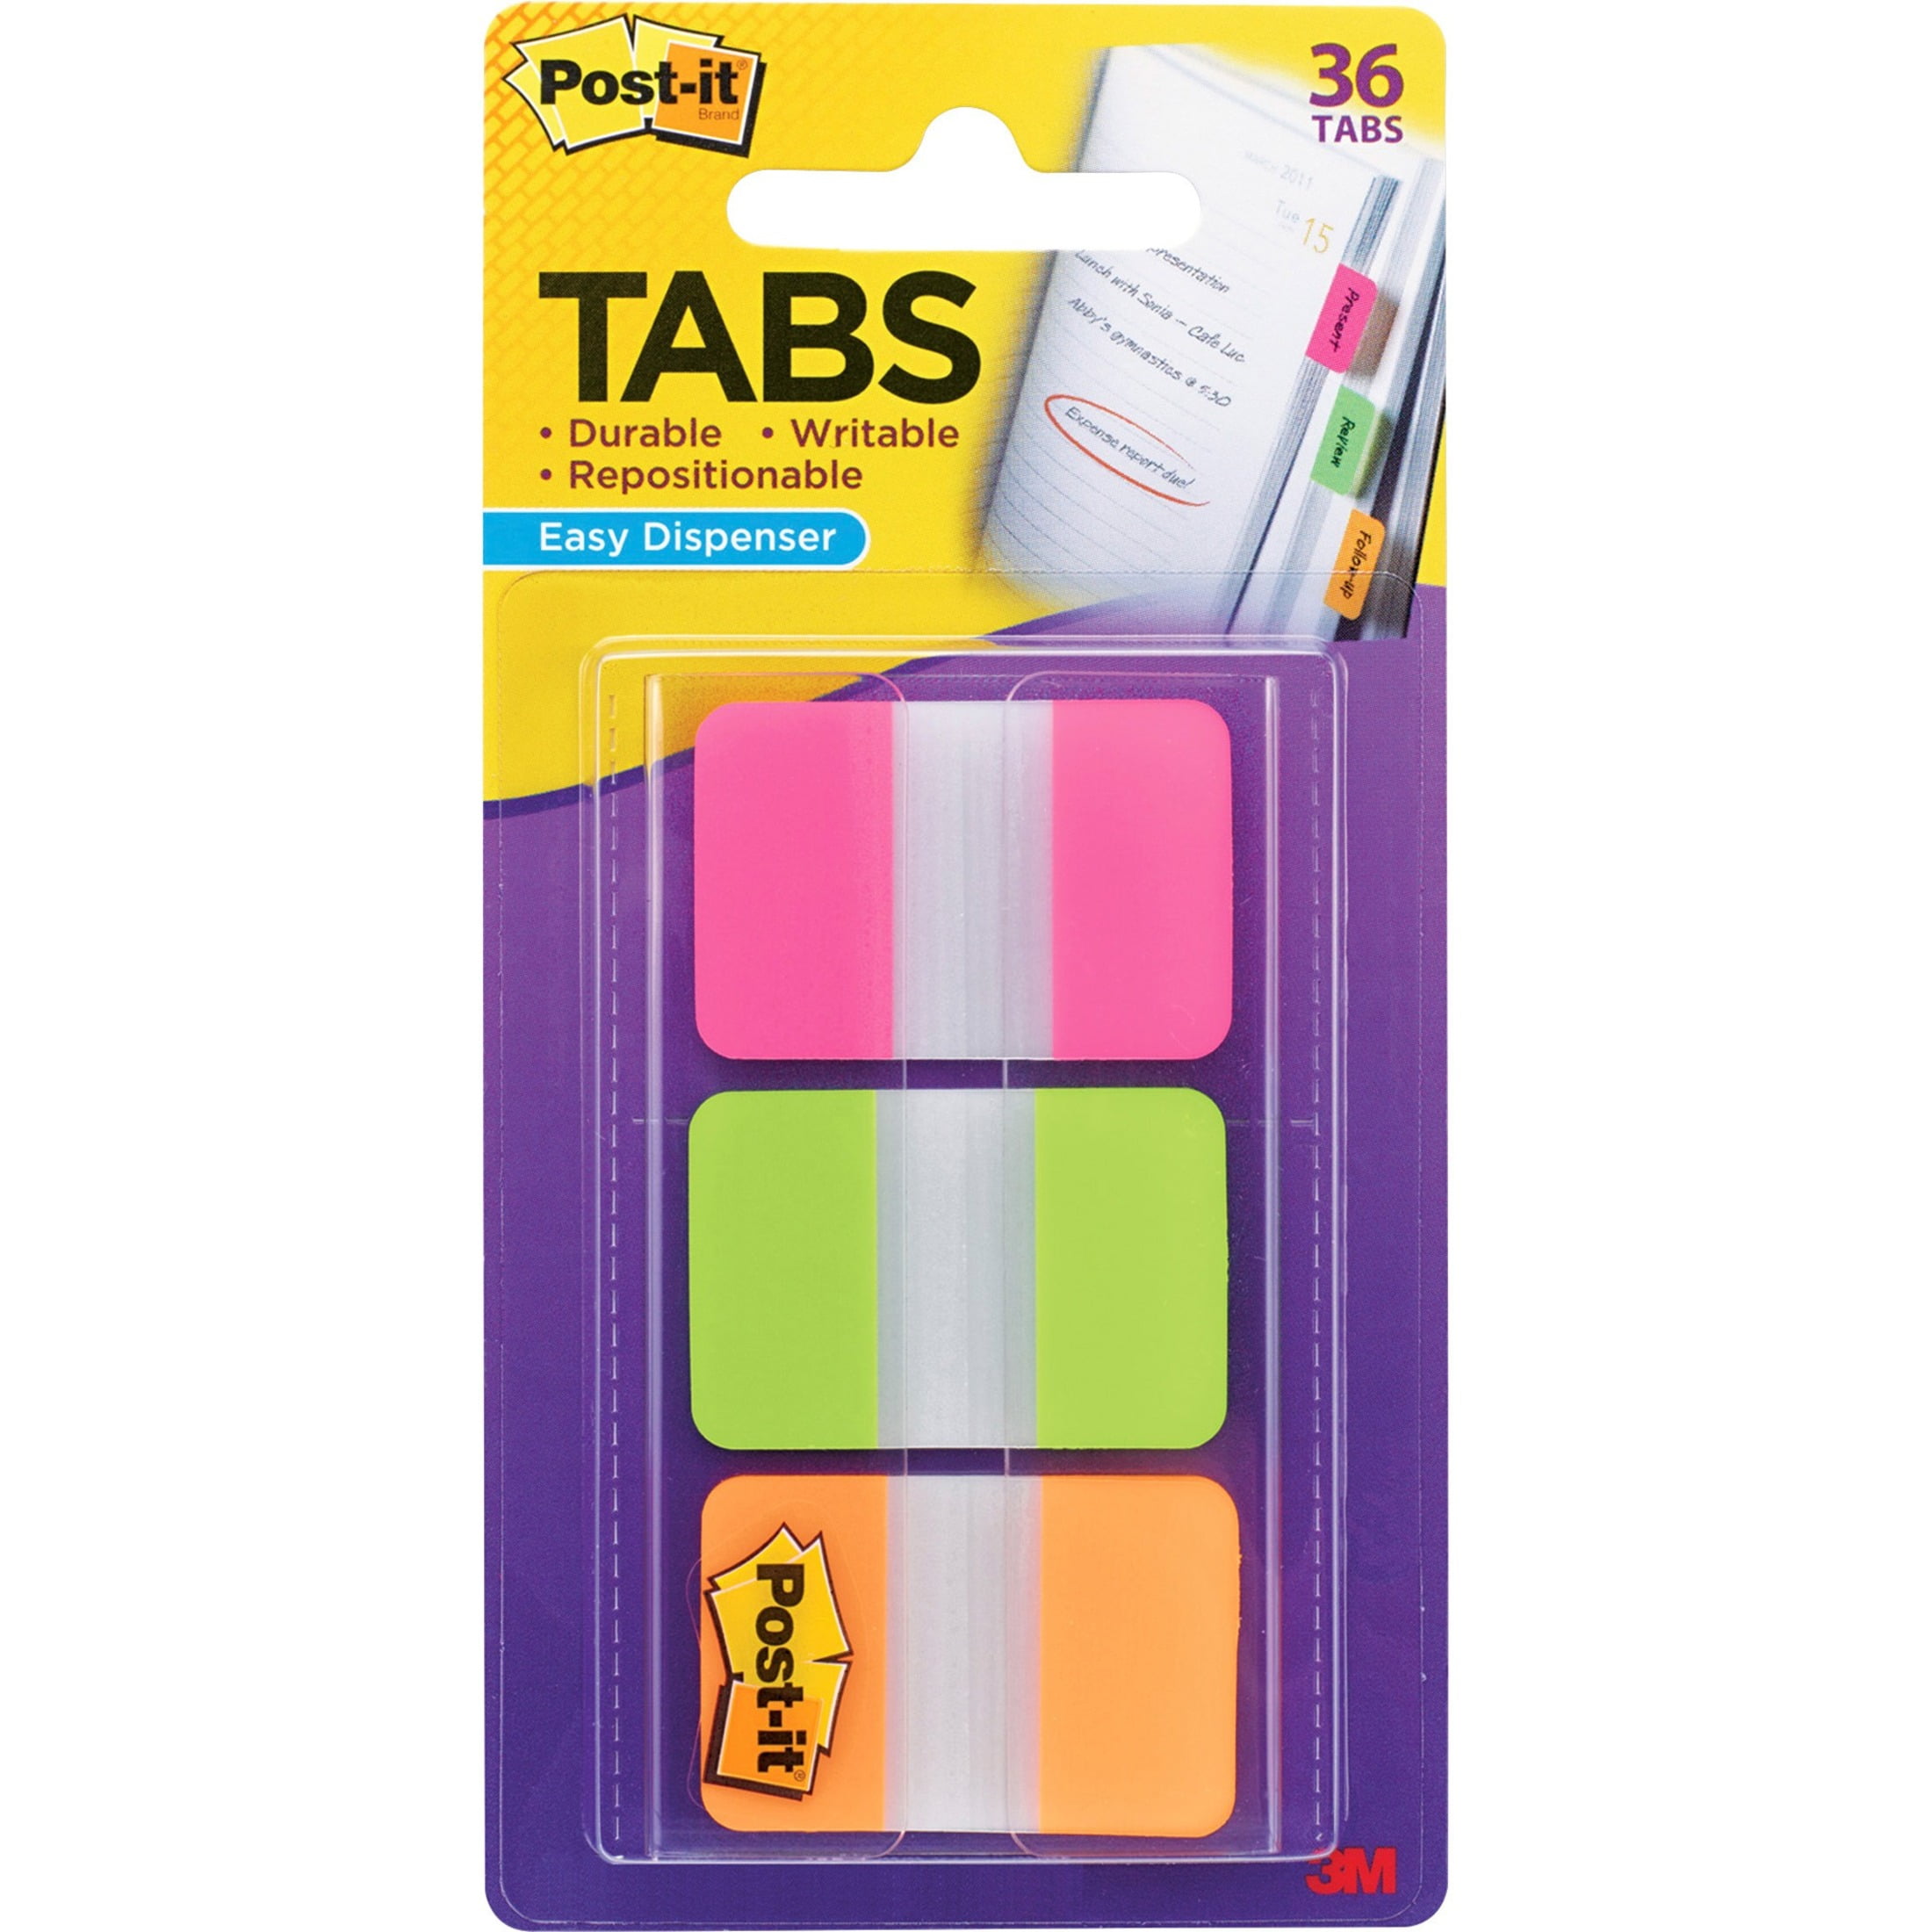 Repositionable 686-VAD2 Sizes Assorted Primary Colors Sticks Securely 114 Tabs/Pack, Durable 1 in Removes Cleanly Post-it Tabs Value Pack Writable and 2 in